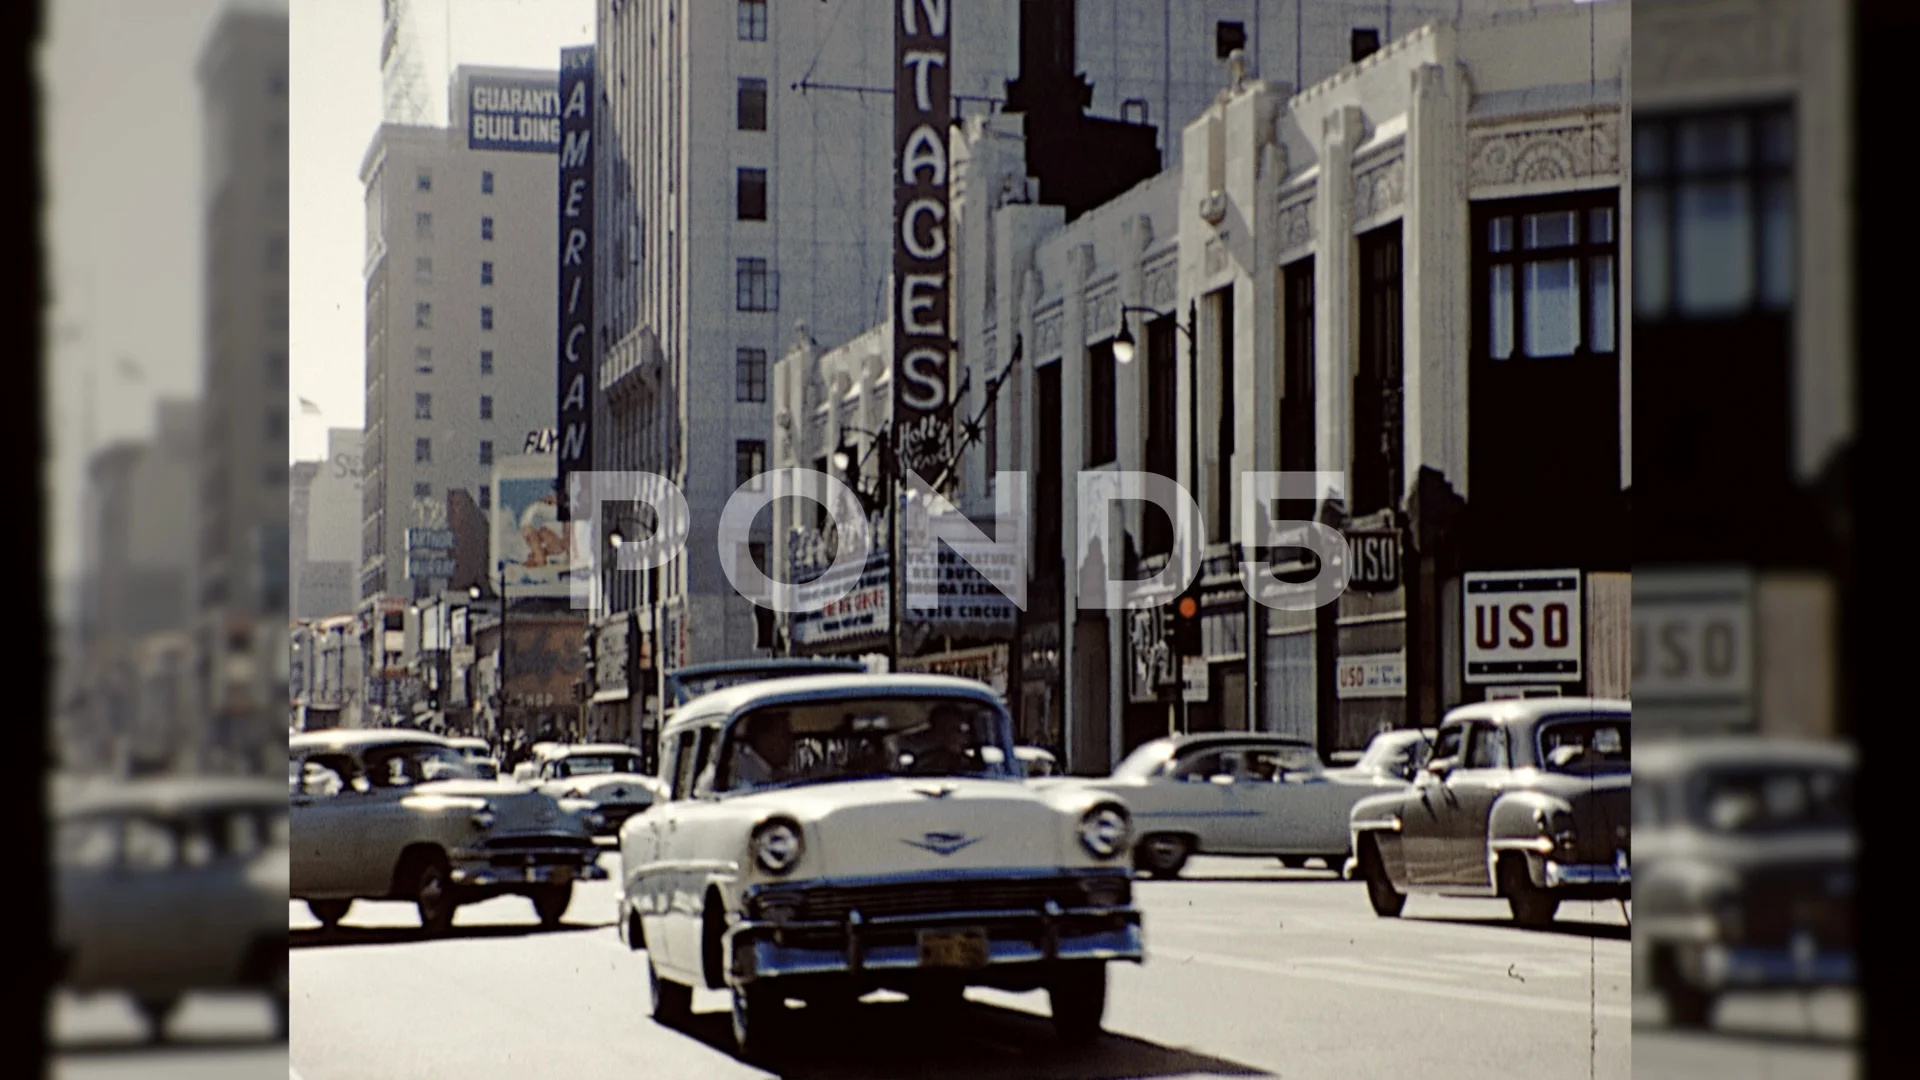 Vintage Los Angeles on X: Hollywood & Vine during the 1950s.I